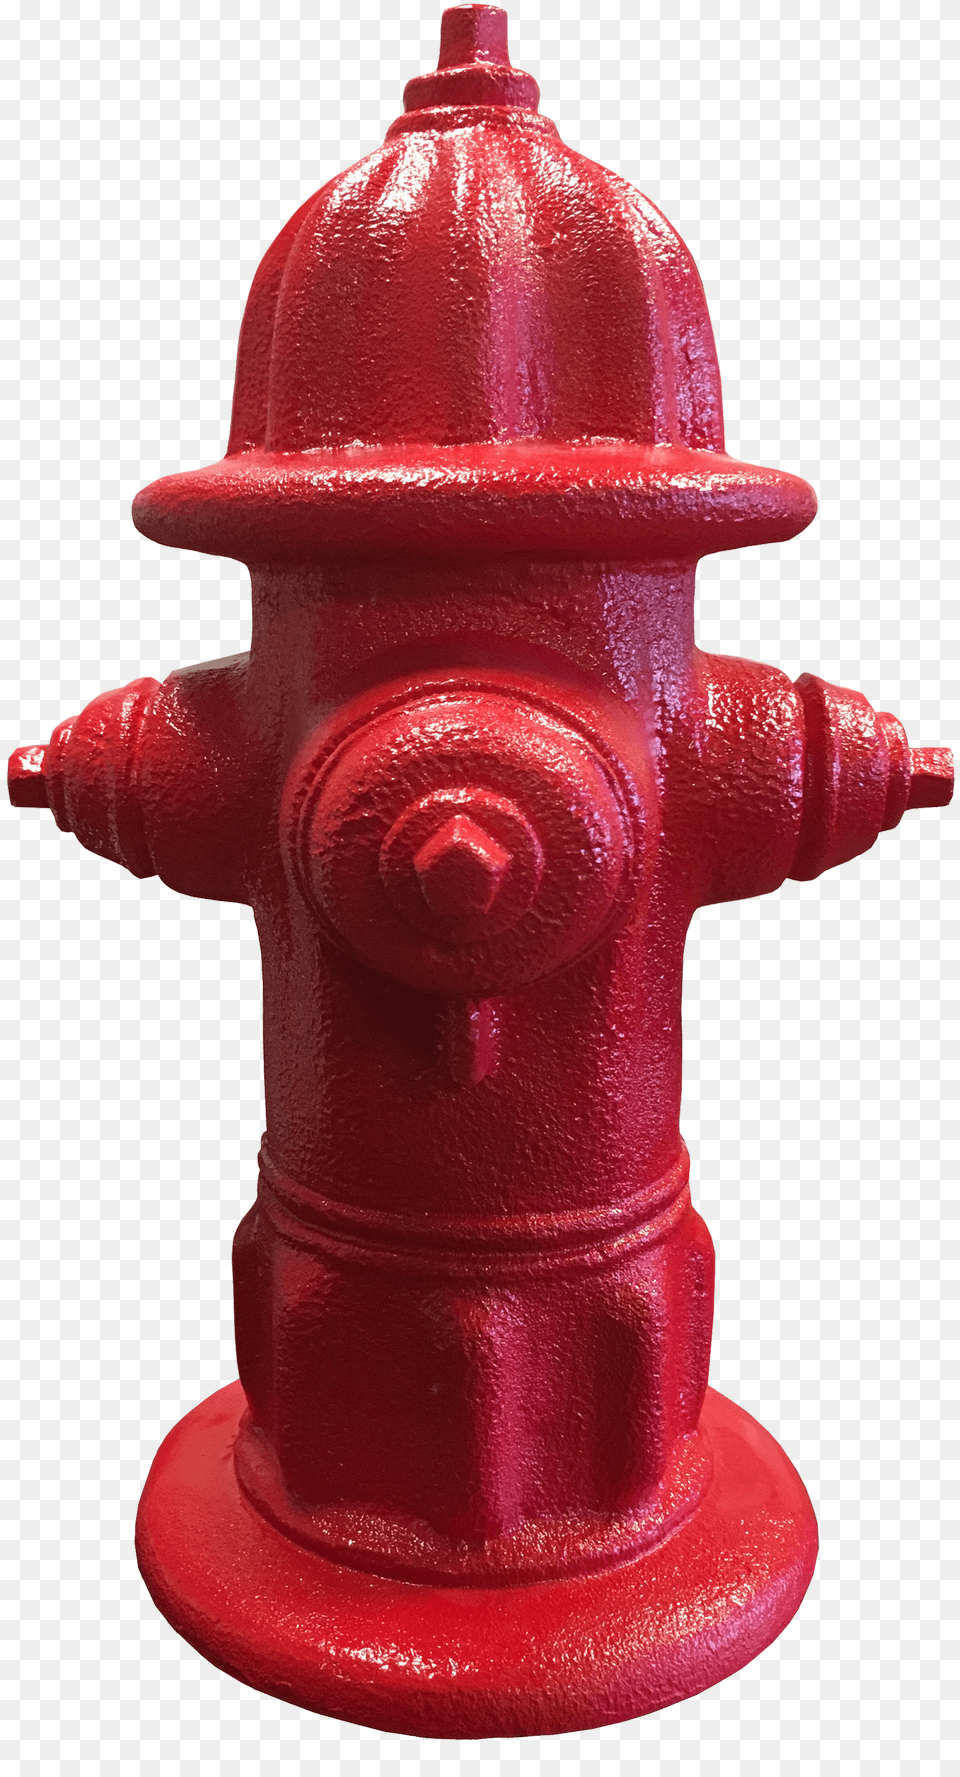 Fire Hydrant Fire Hydrant Png Image